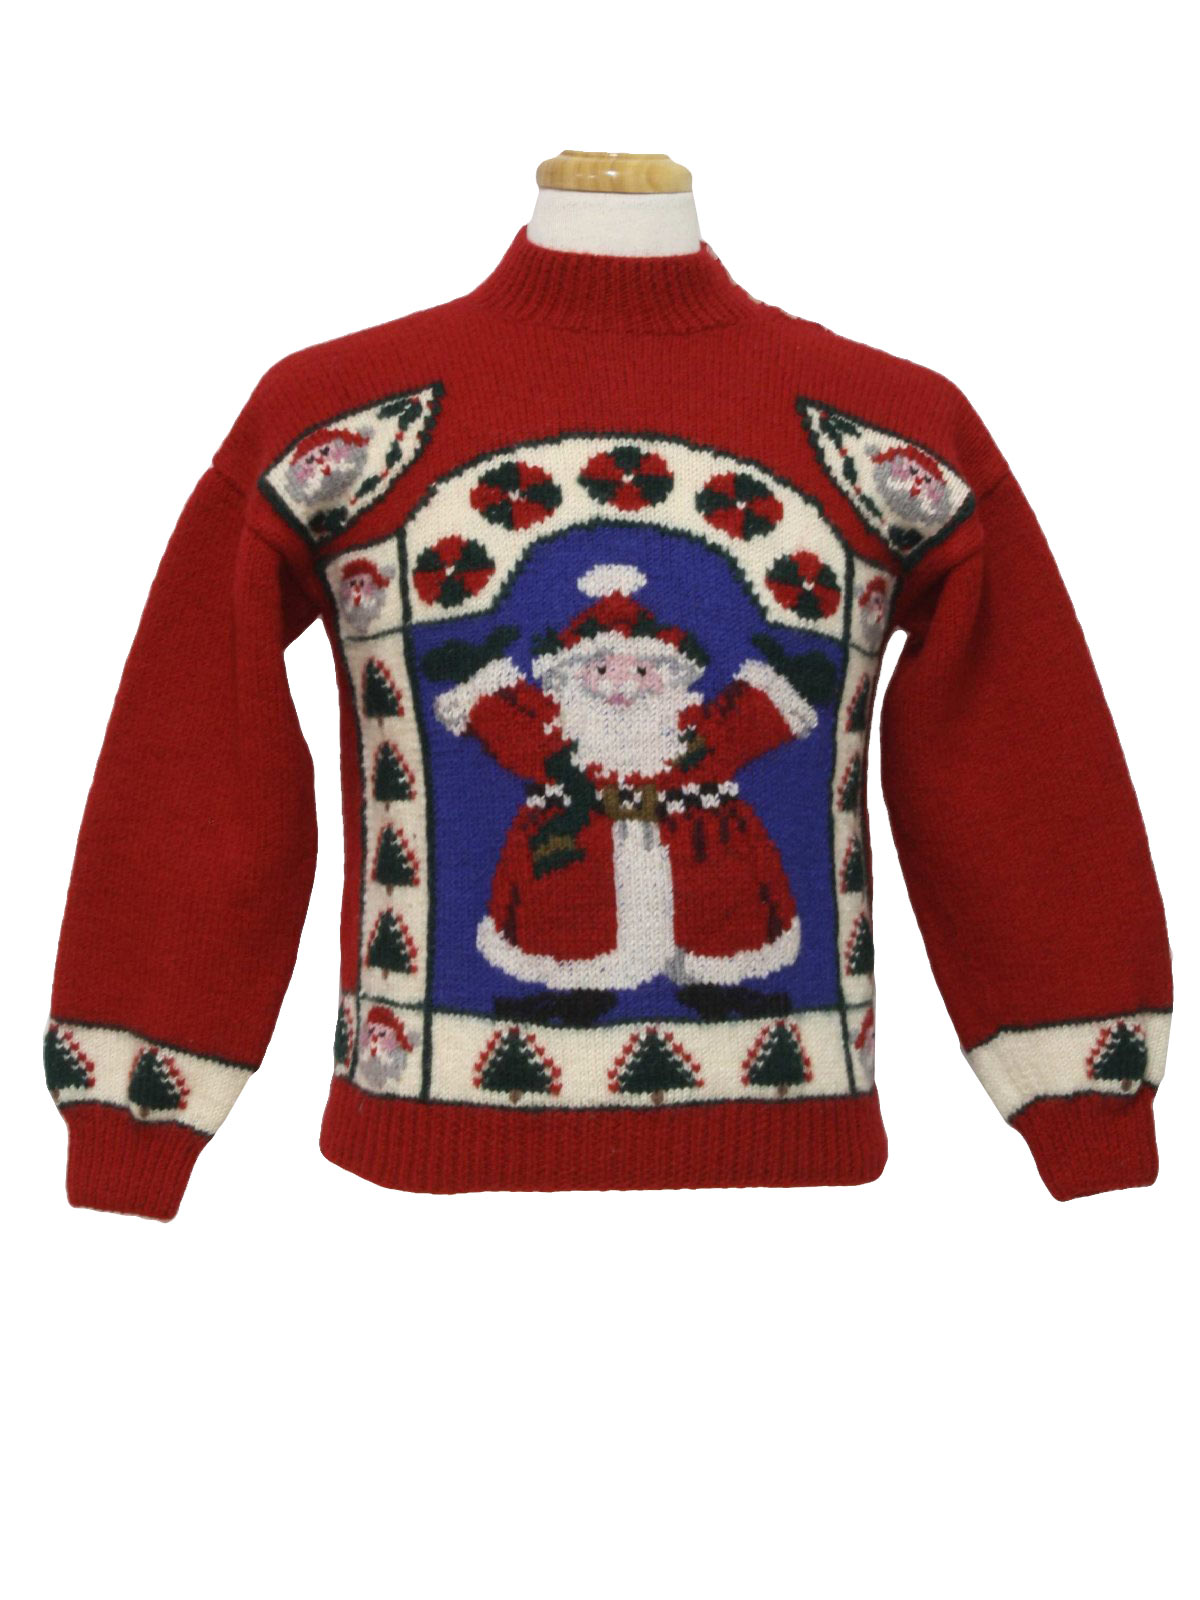 Retro 70s Womens Ugly Christmas Sweater (South wool) : Late 70s or ...